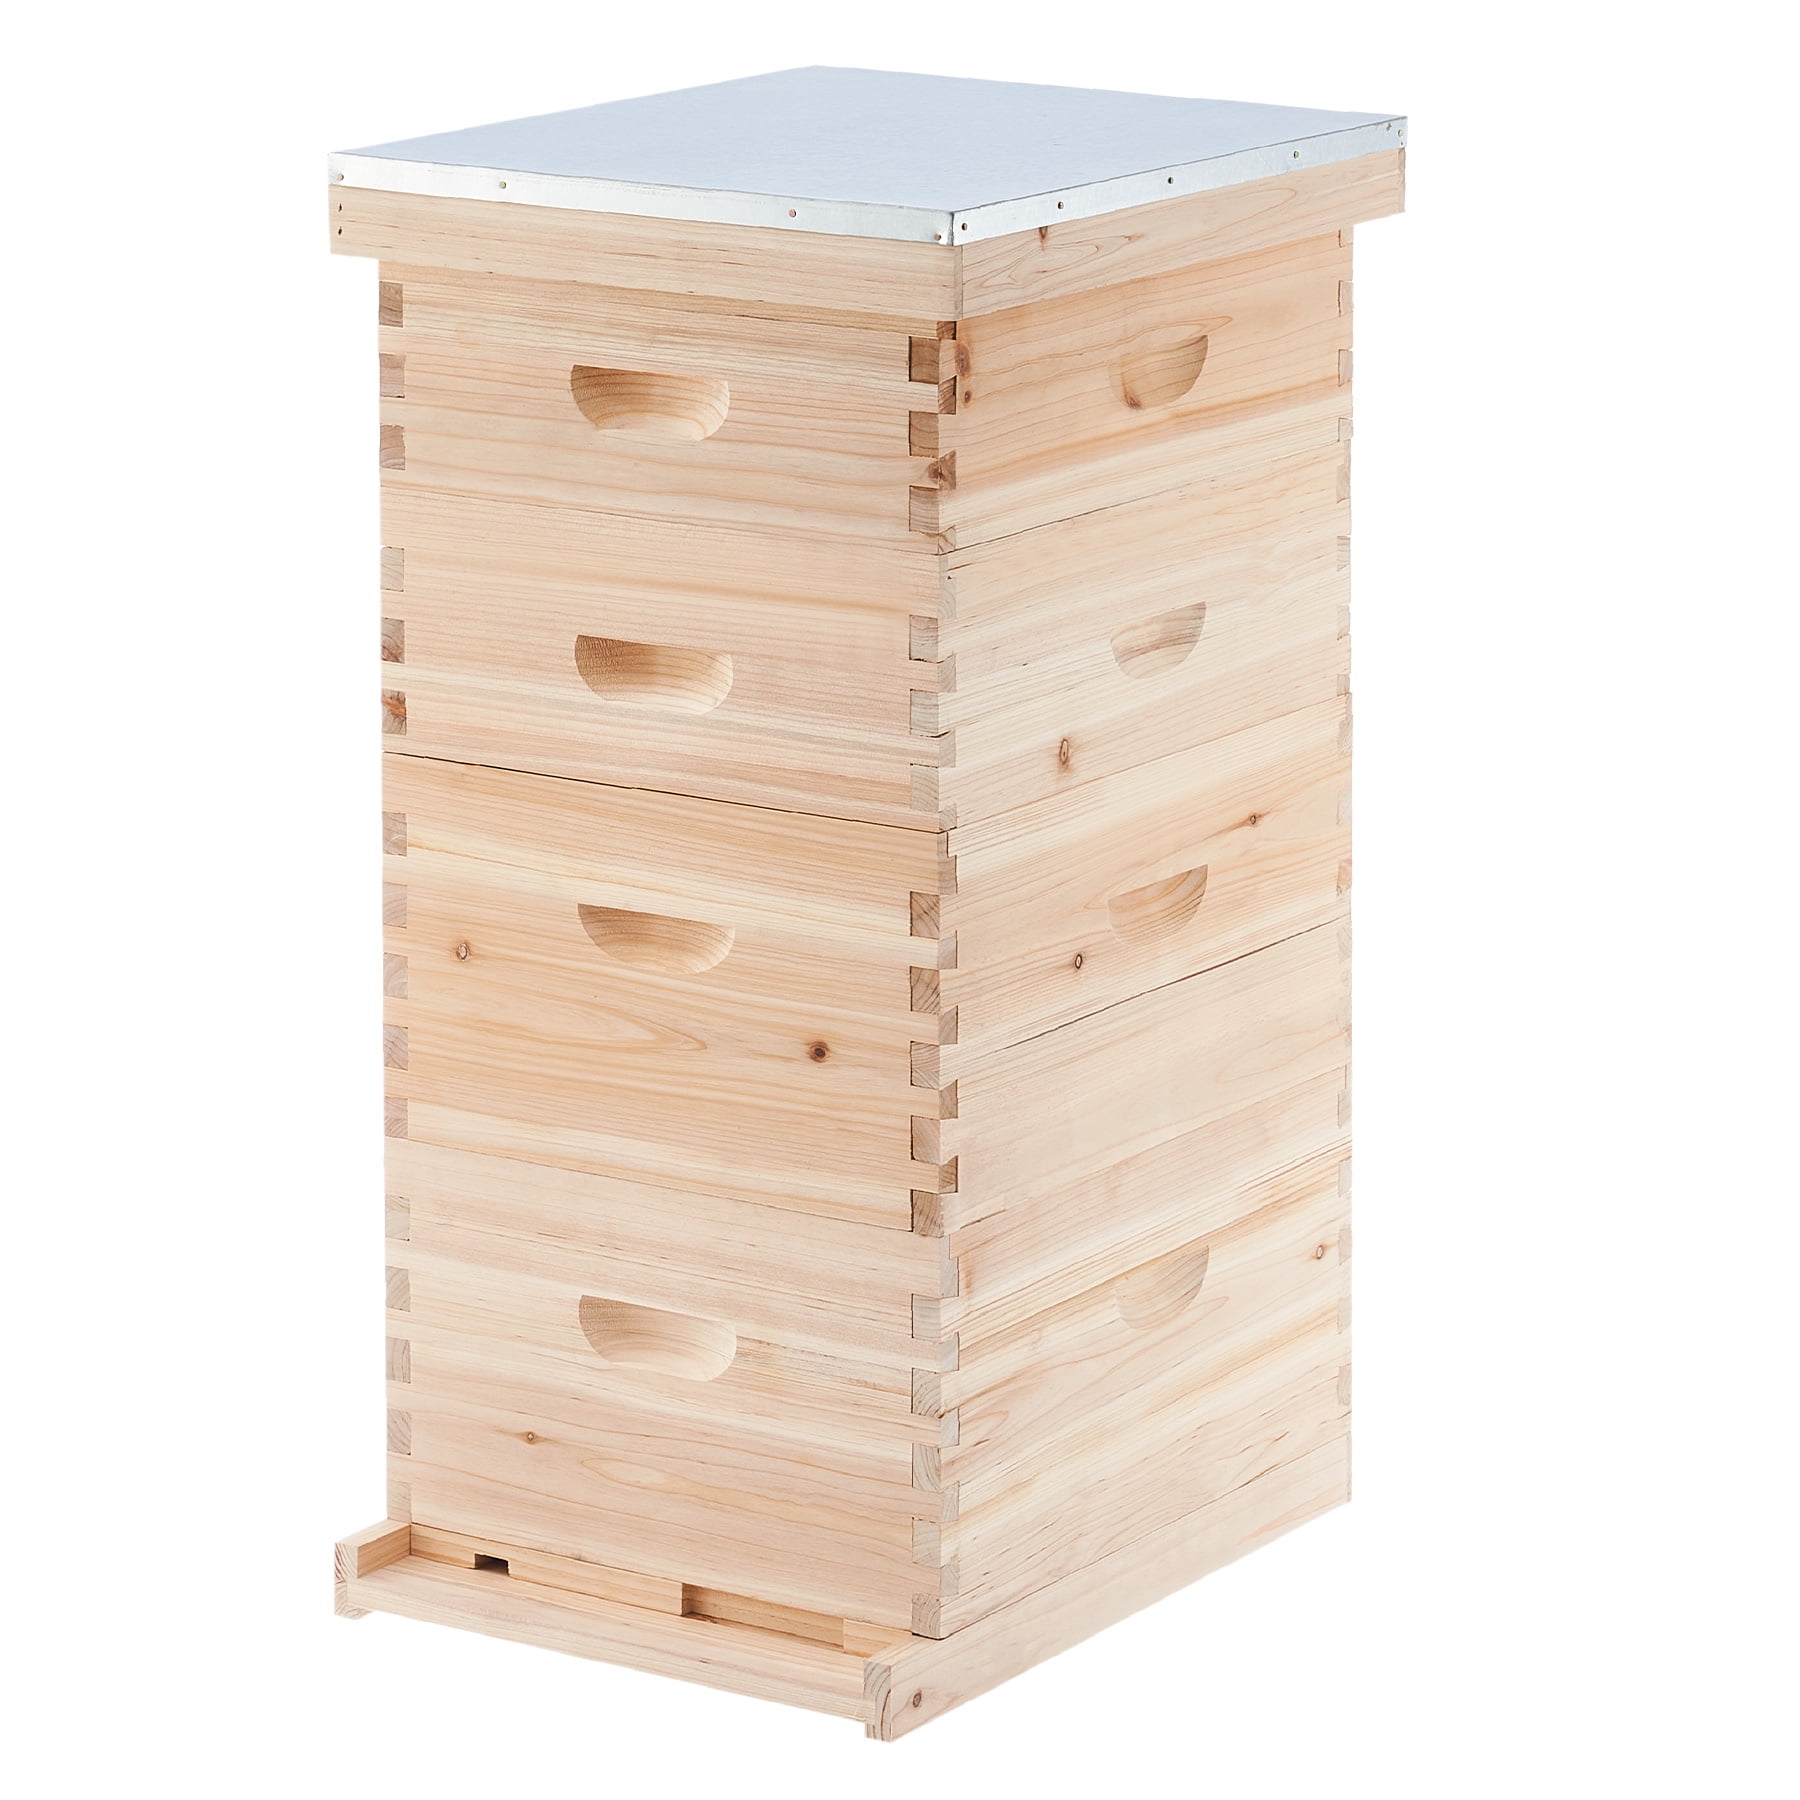 Details about   Beekeper Honey Bee Hive House Brood Box Set Wooden Box for Auto Honey Frames 